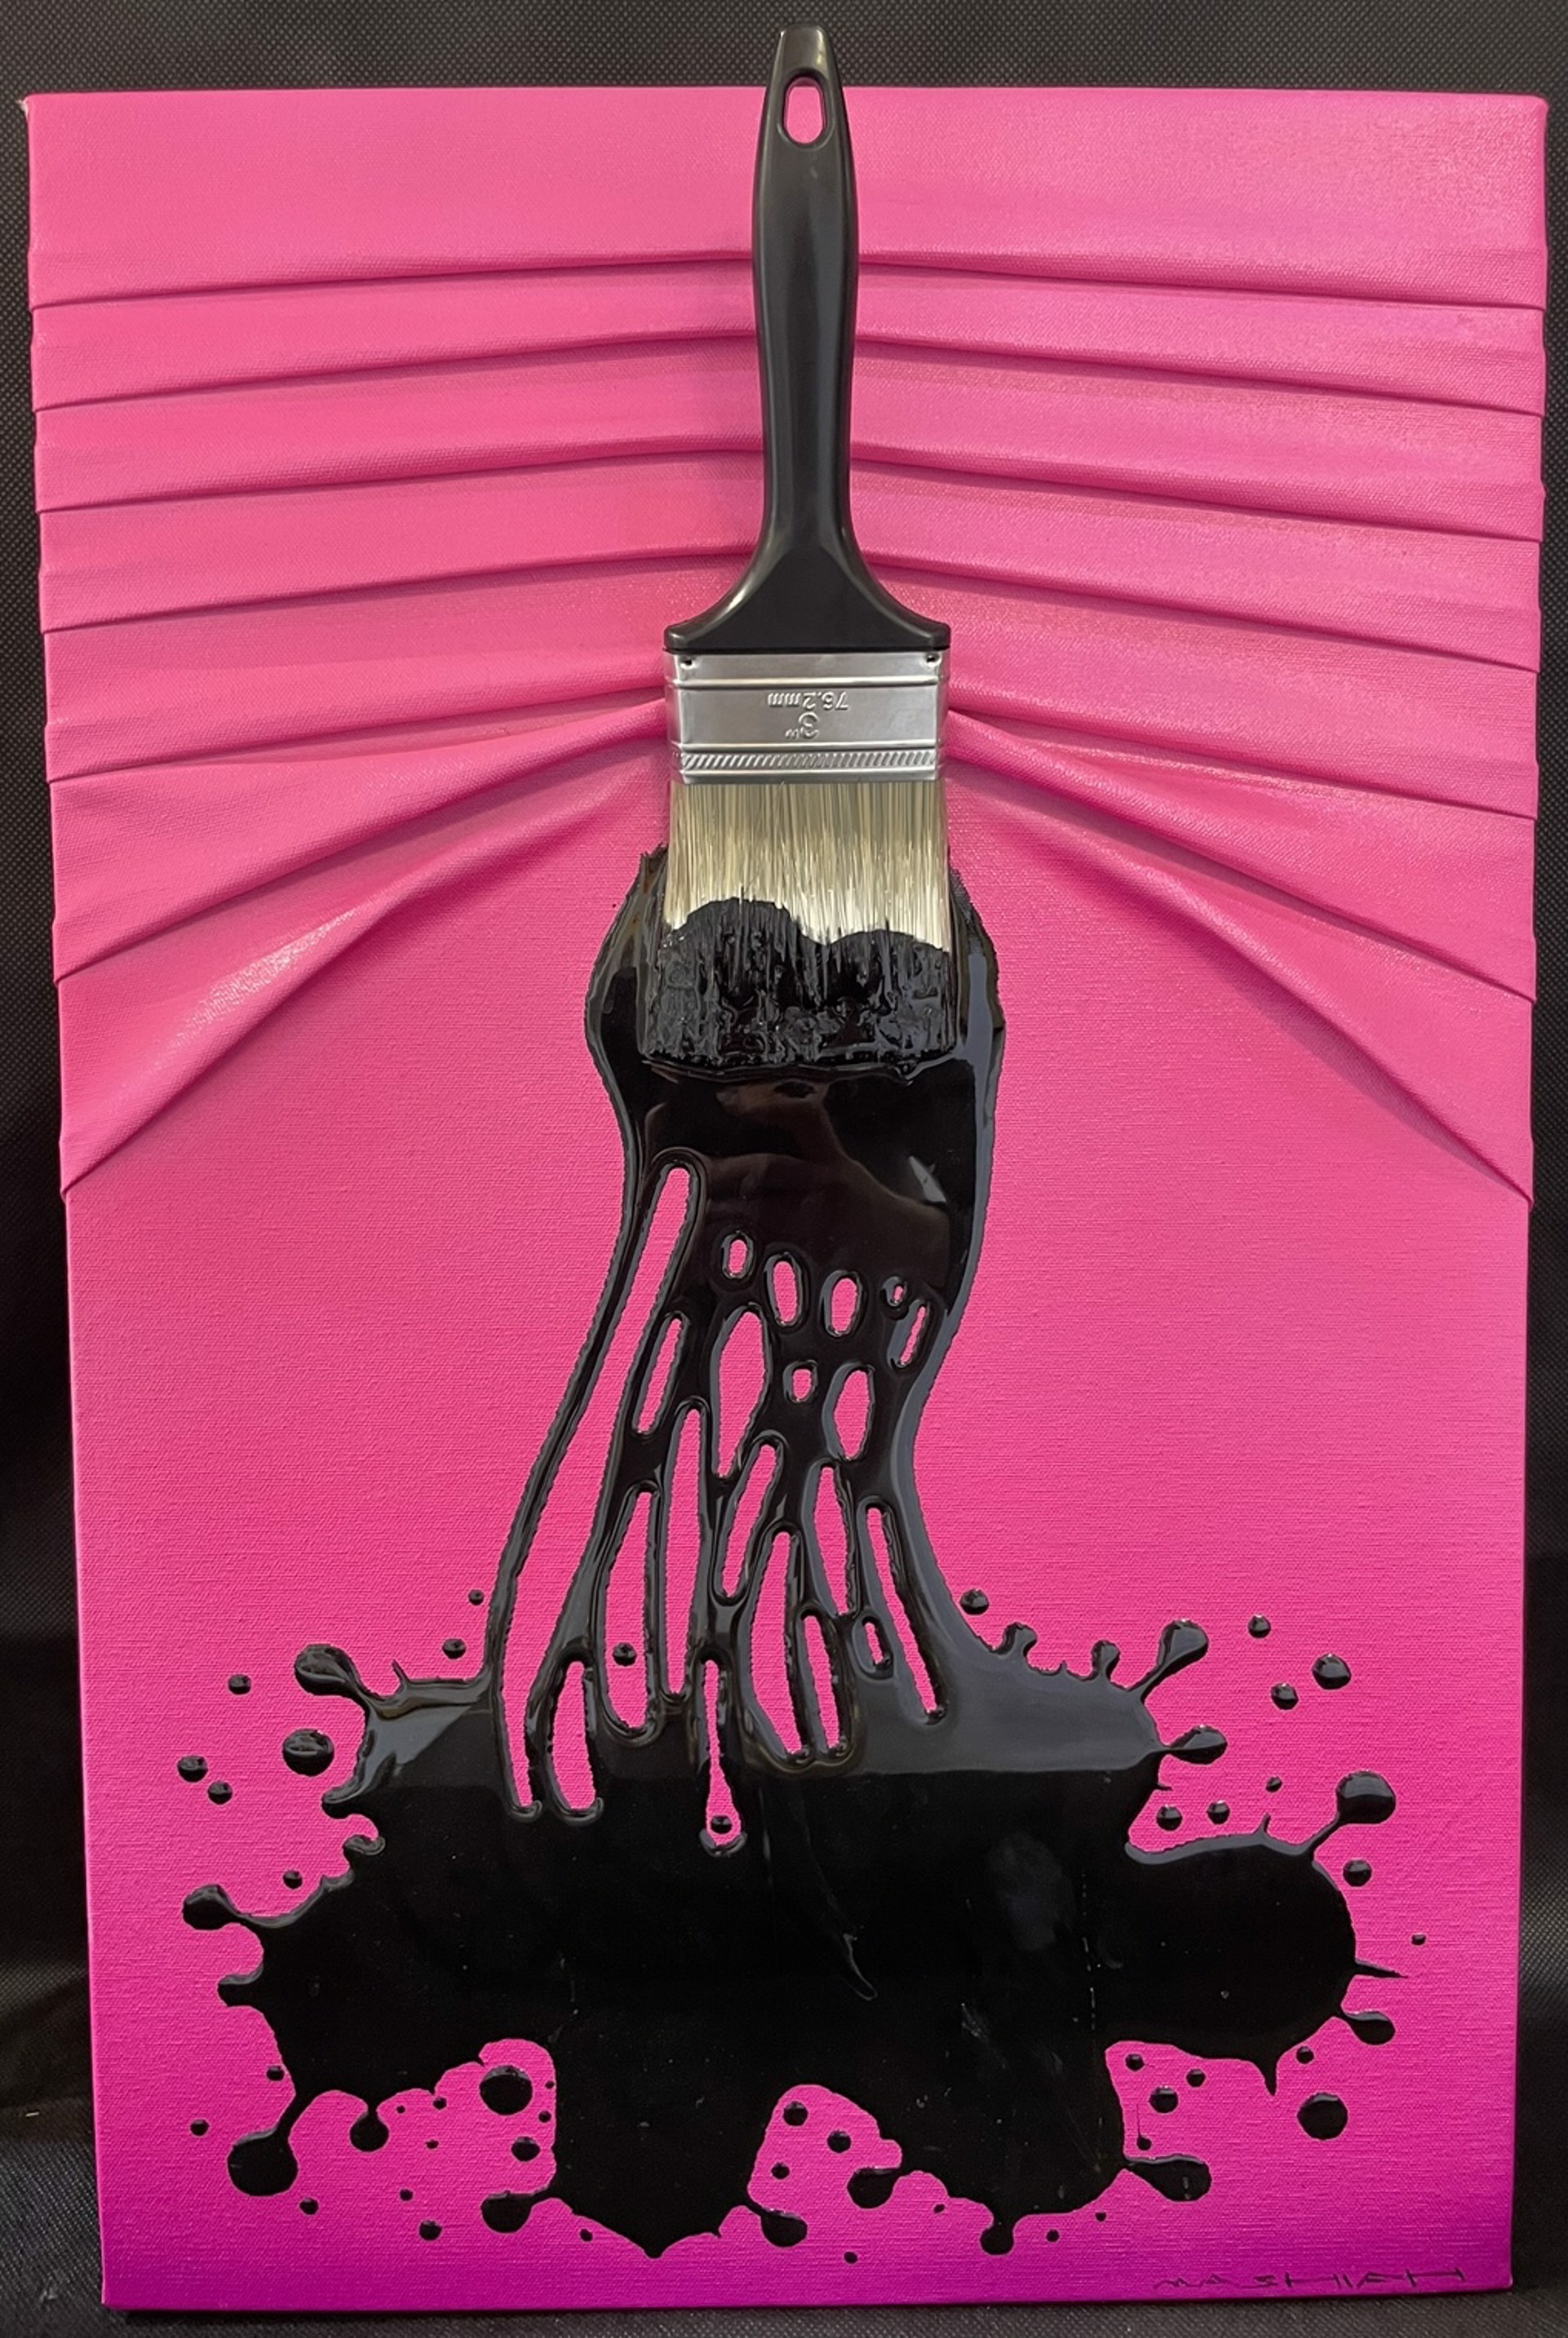 Black Splash on the Pink Canvas by Brushes and Rollers "Let's Paint" by Efi Mashiah